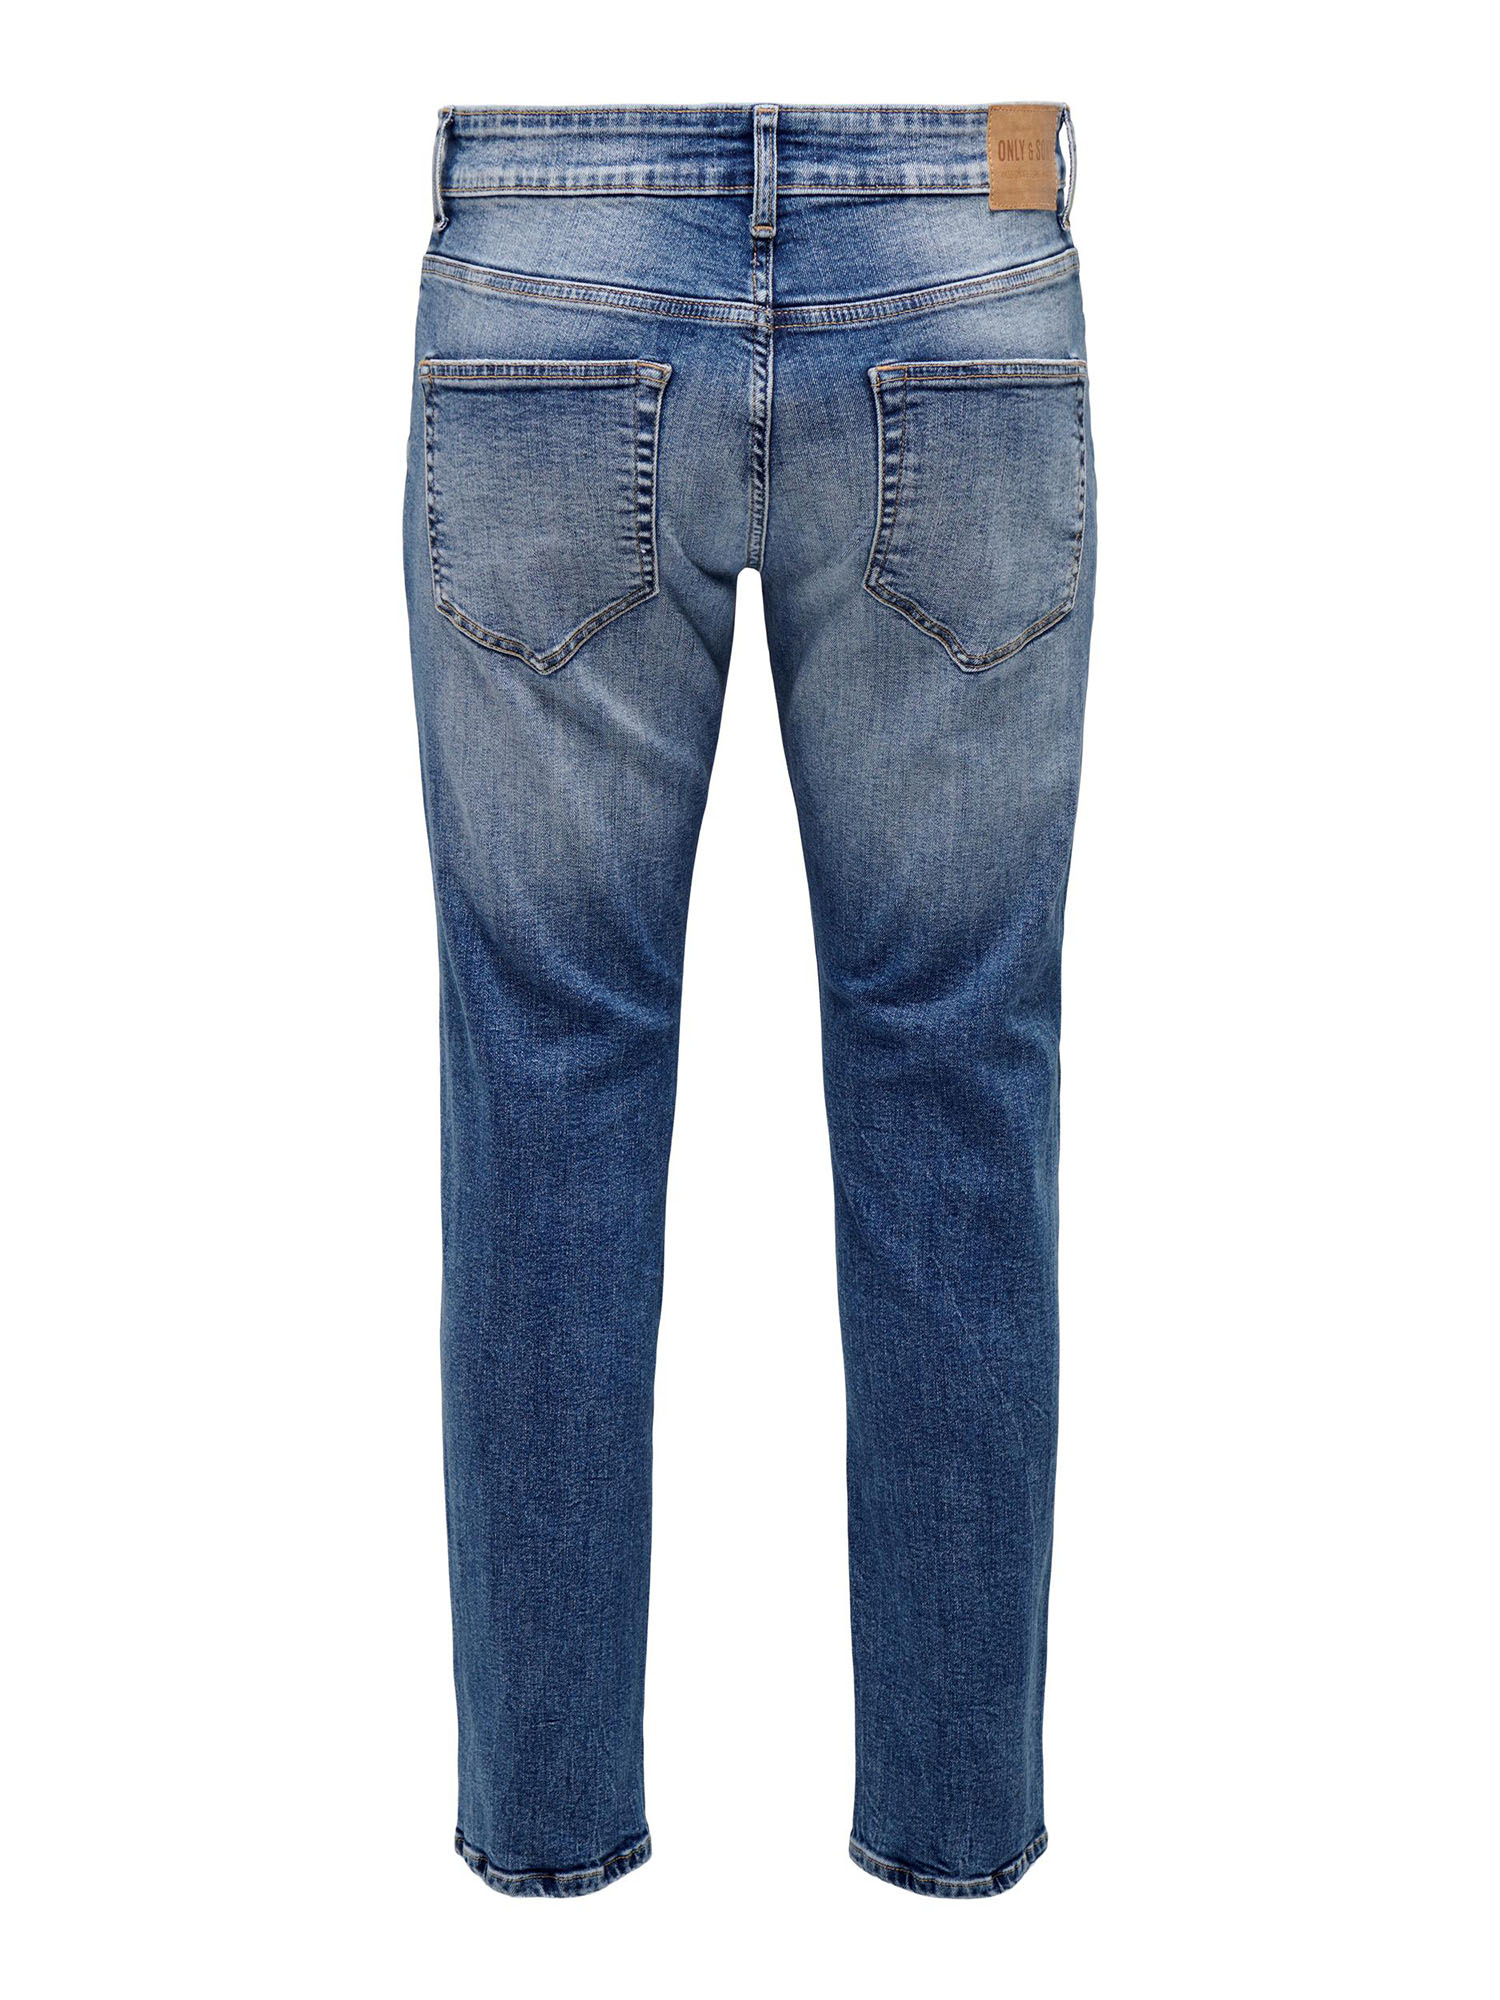 ONLY&SONS WEFT - JEANS